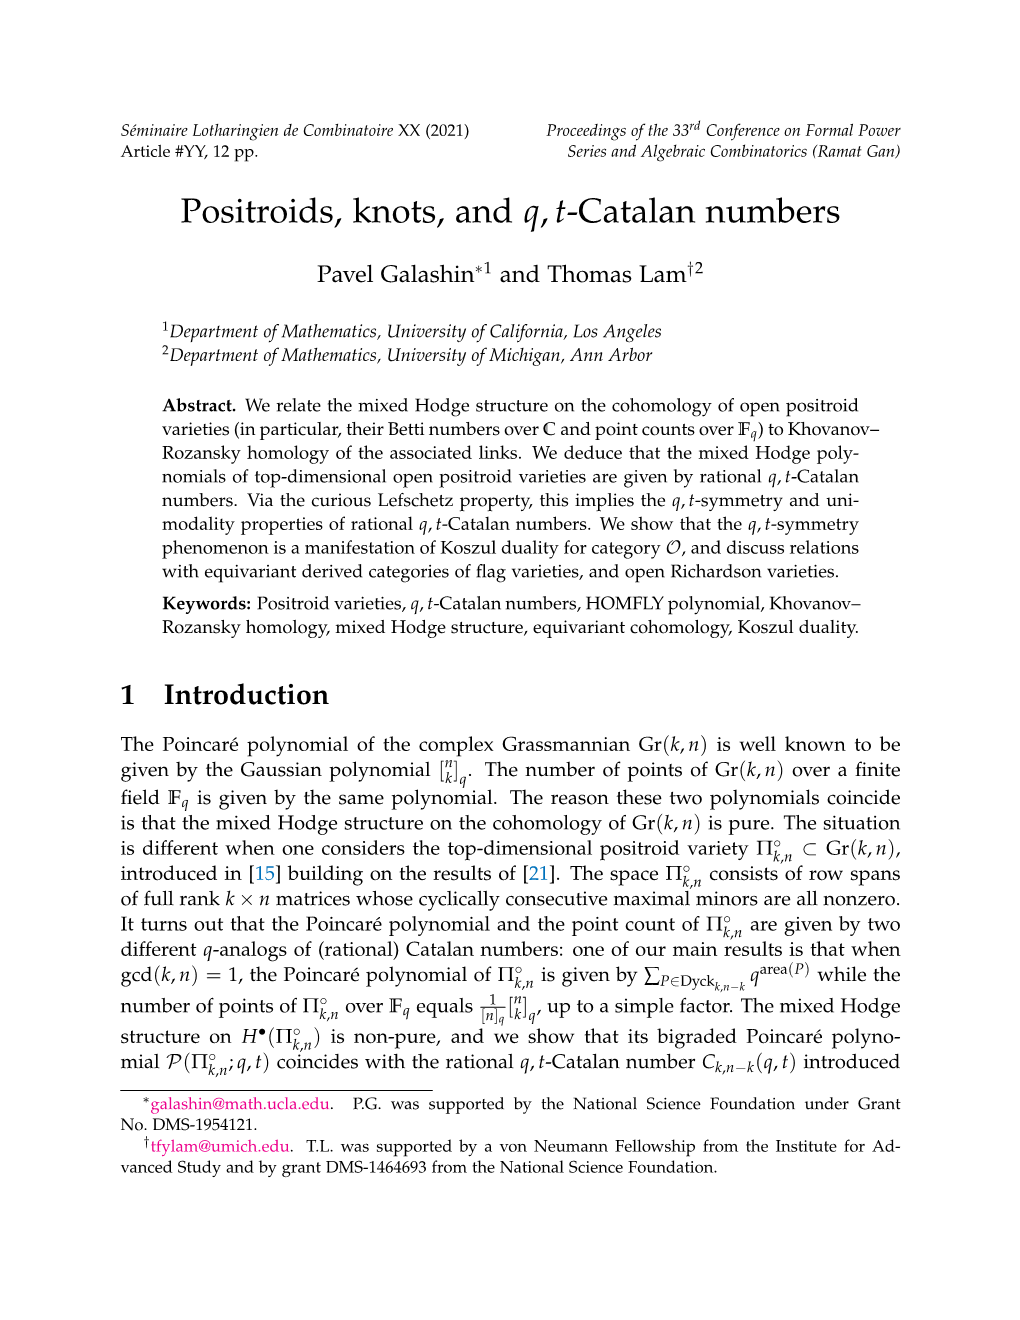 Positroids, Knots, and Q,T-Catalan Numbers